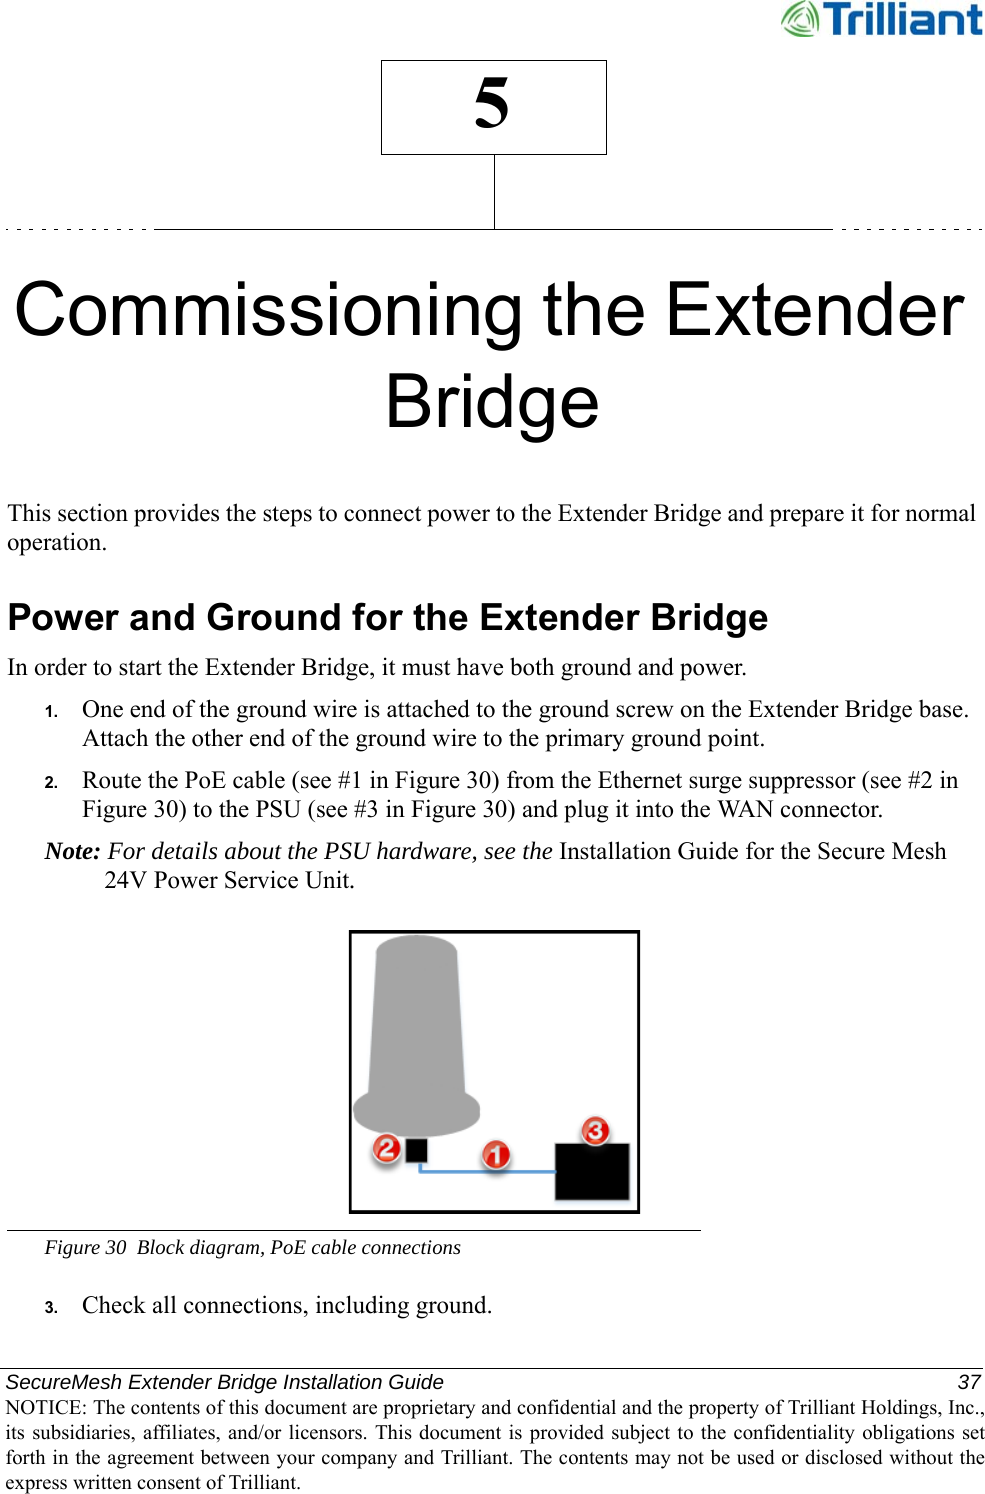 SecureMesh Extender Bridge Installation Guide  37NOTICE: The contents of this document are proprietary and confidential and the property of Trilliant Holdings, Inc.,its subsidiaries, affiliates, and/or licensors. This document  is  provided subject  to  the  confidentiality obligations setforth in the agreement between your company and Trilliant. The contents may not be used or disclosed without theexpress written consent of Trilliant.5Commissioning the Extender BridgeThis section provides the steps to connect power to the Extender Bridge and prepare it for normal operation.Power and Ground for the Extender BridgeIn order to start the Extender Bridge, it must have both ground and power.1. One end of the ground wire is attached to the ground screw on the Extender Bridge base. Attach the other end of the ground wire to the primary ground point.2. Route the PoE cable (see #1 in Figure 30) from the Ethernet surge suppressor (see #2 in Figure 30) to the PSU (see #3 in Figure 30) and plug it into the WAN connector.Note: For details about the PSU hardware, see the Installation Guide for the Secure Mesh 24V Power Service Unit.Figure 30 Block diagram, PoE cable connections3. Check all connections, including ground.